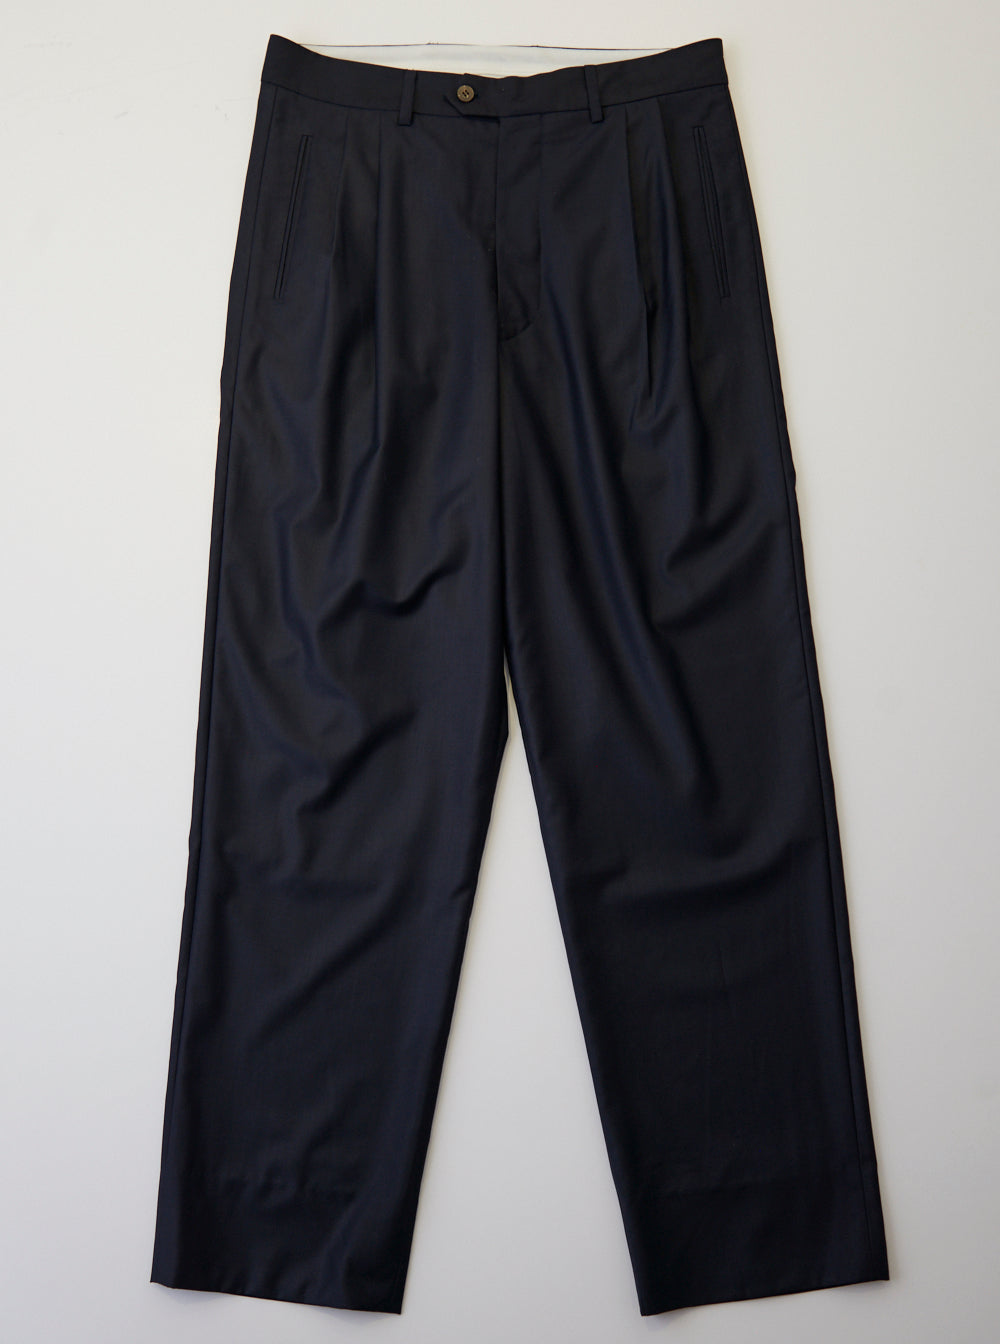 Vinti Andrews Tailor Trousers Black Suiting